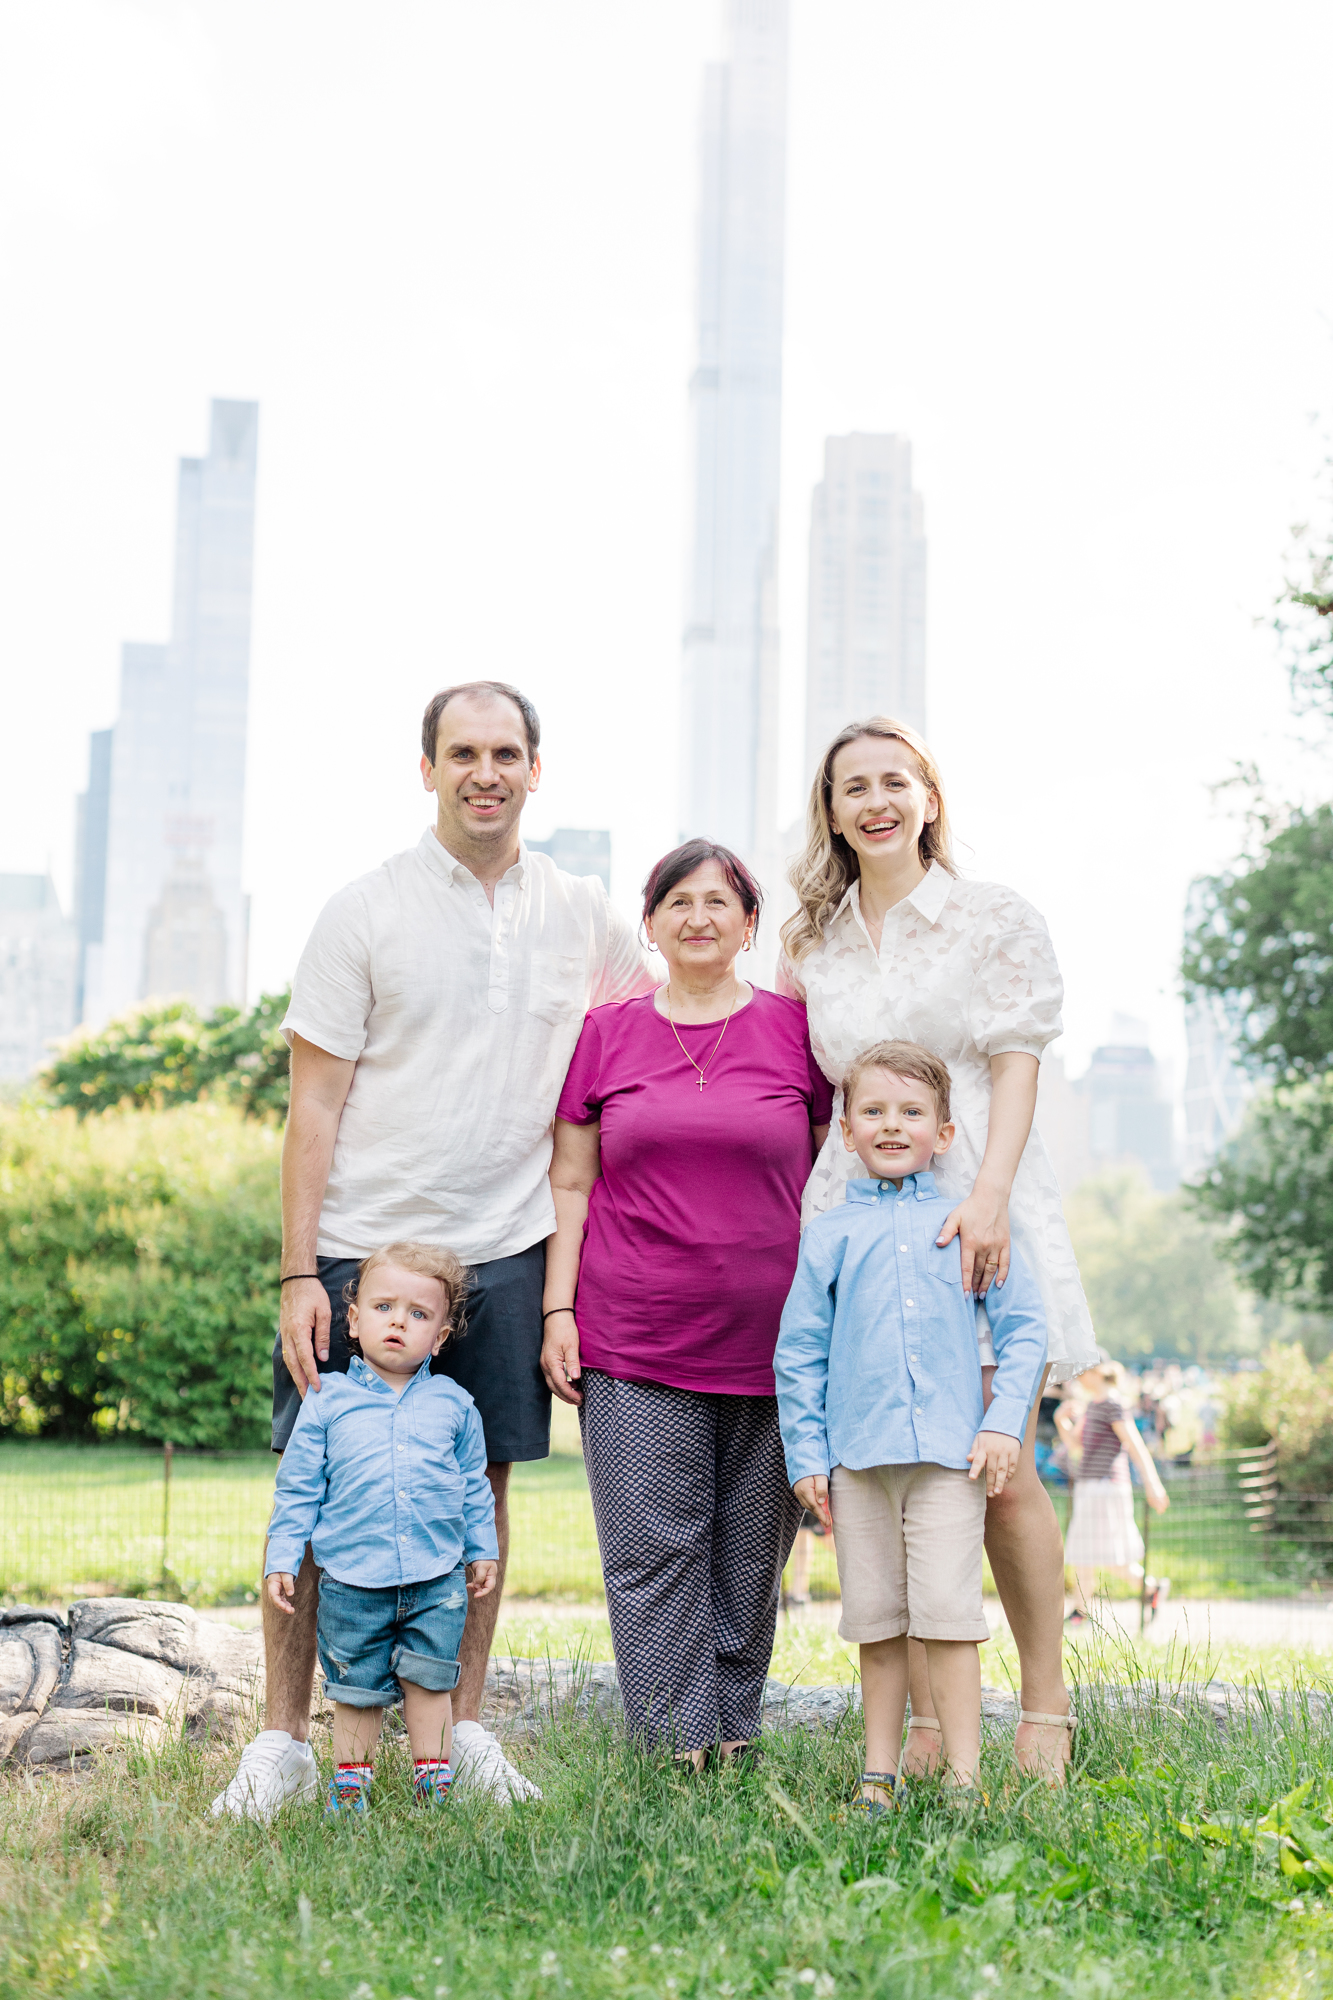 Iconic Family Photos in Central Park